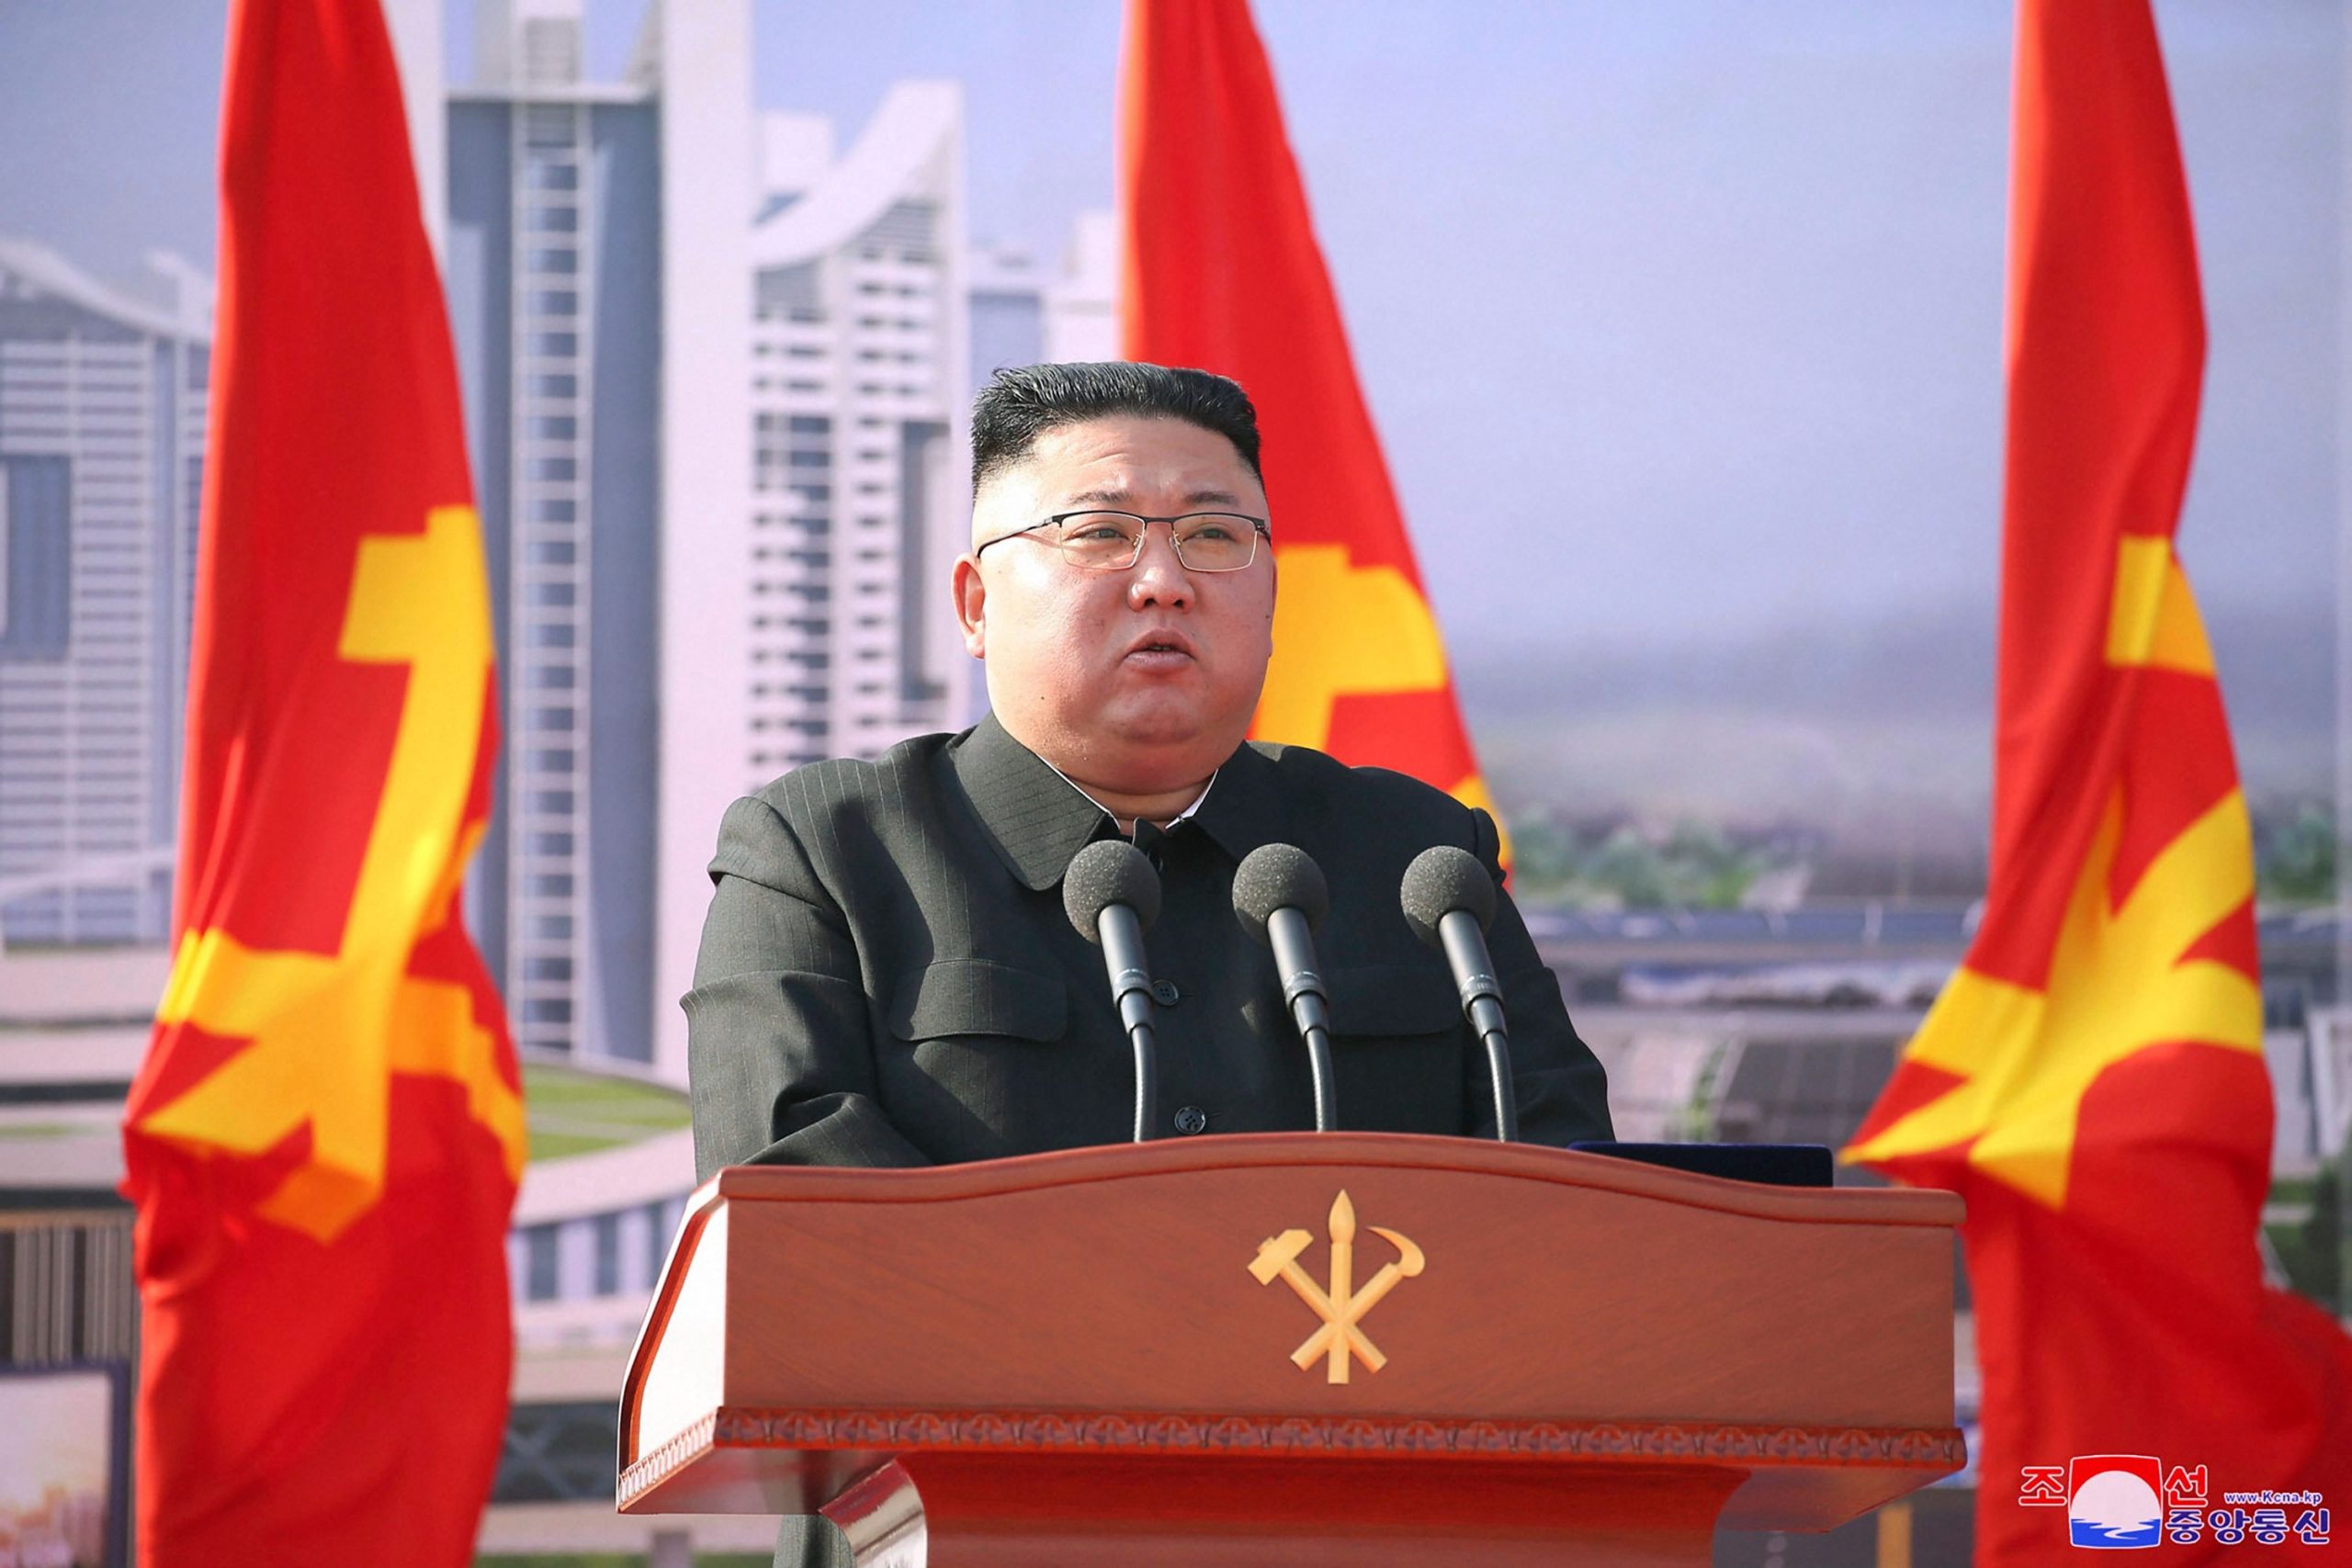 Who is Kim Jong Un’s second in command? Advisors or sister